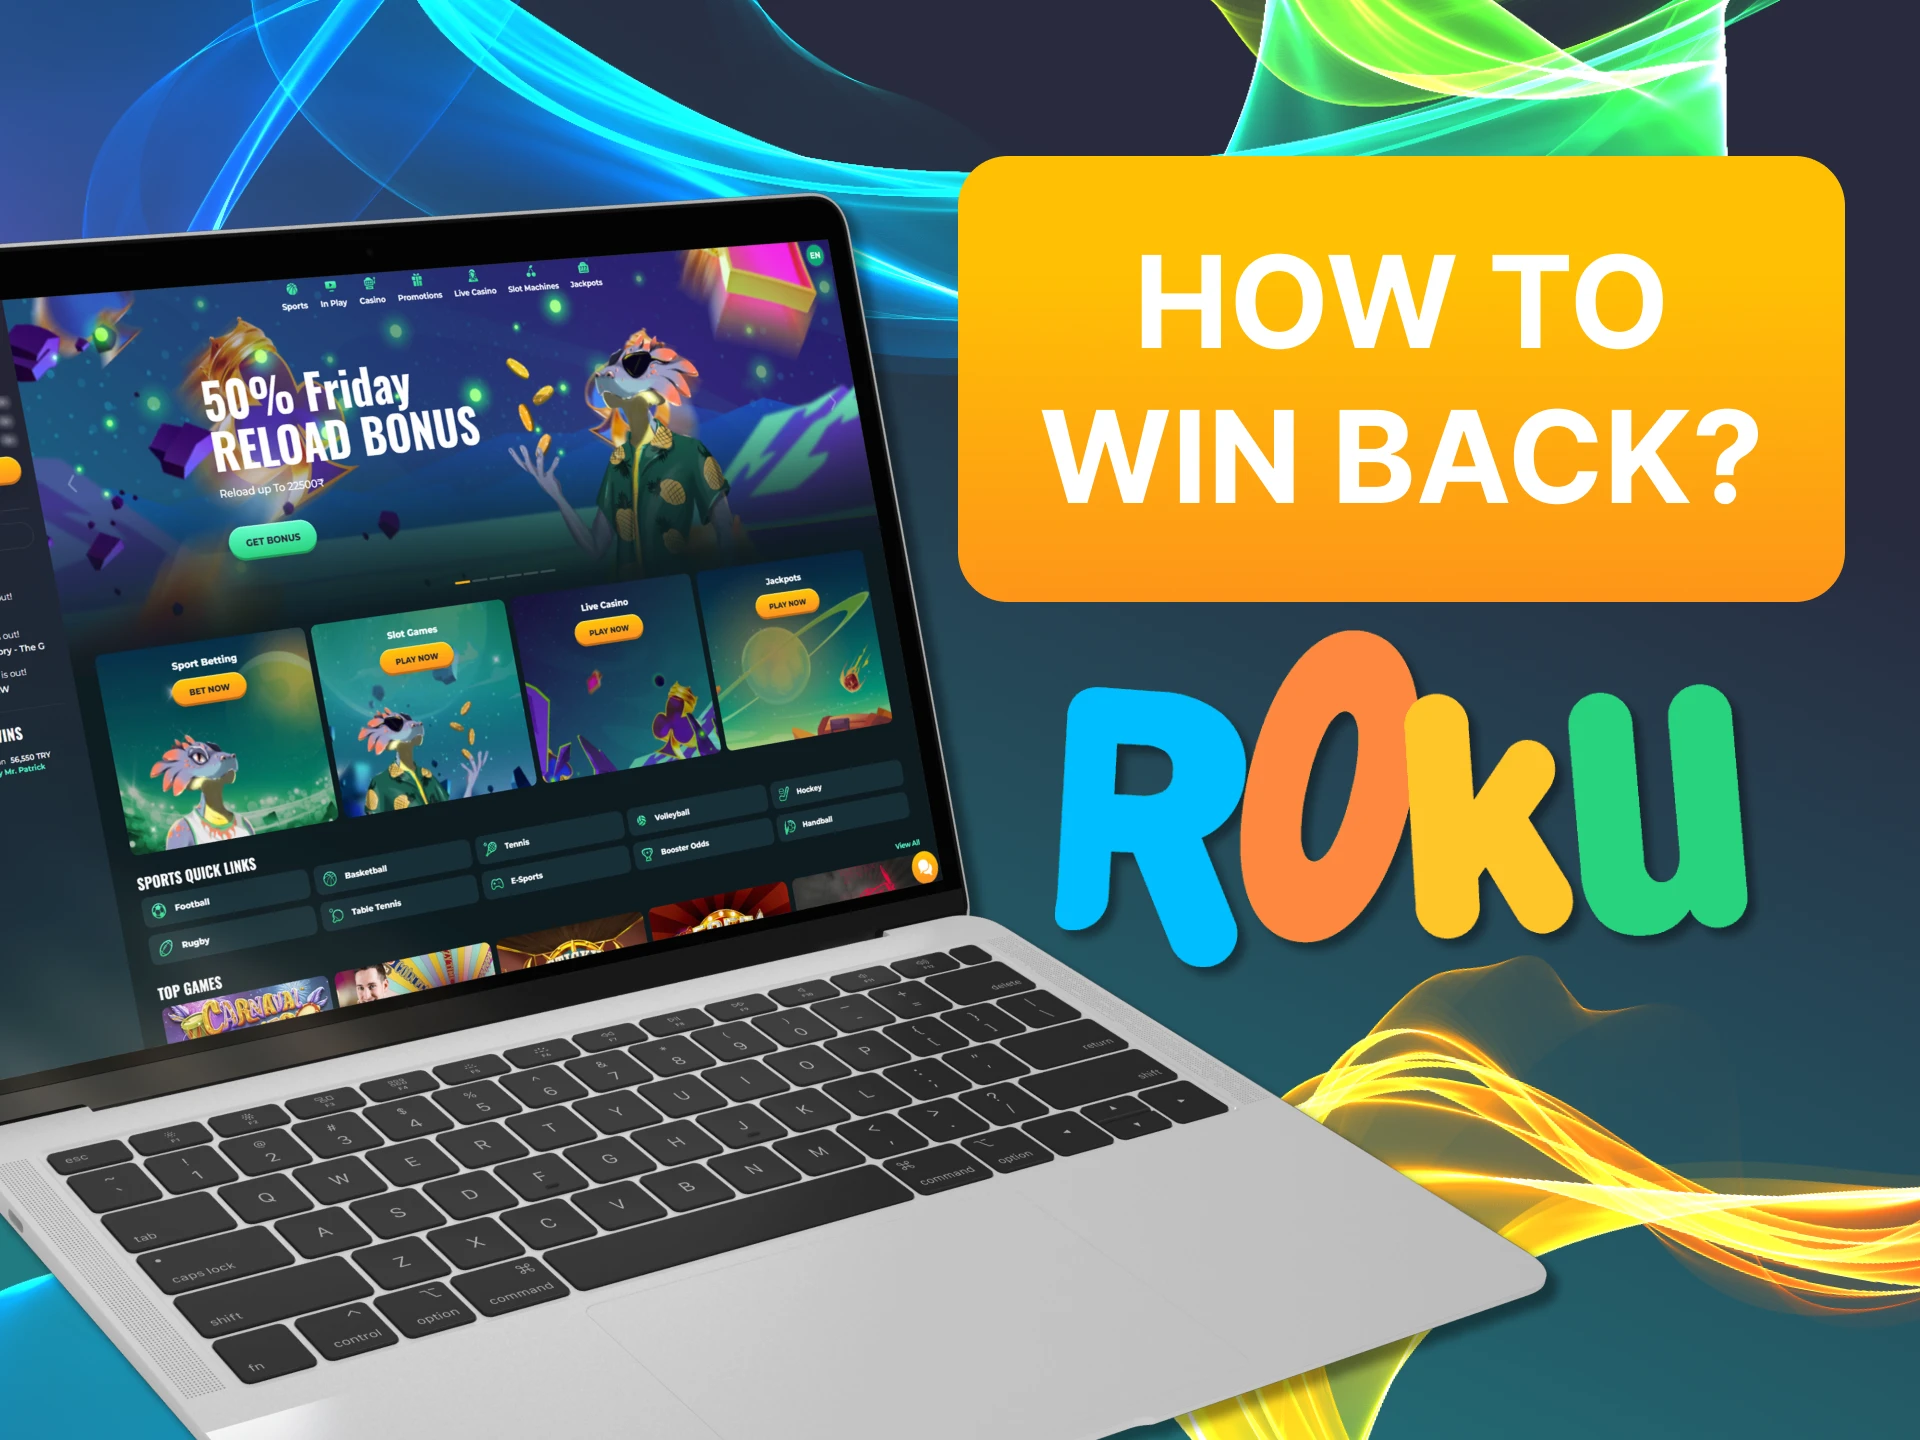 Learn how to use and win back the Rokubet welcome bonus.